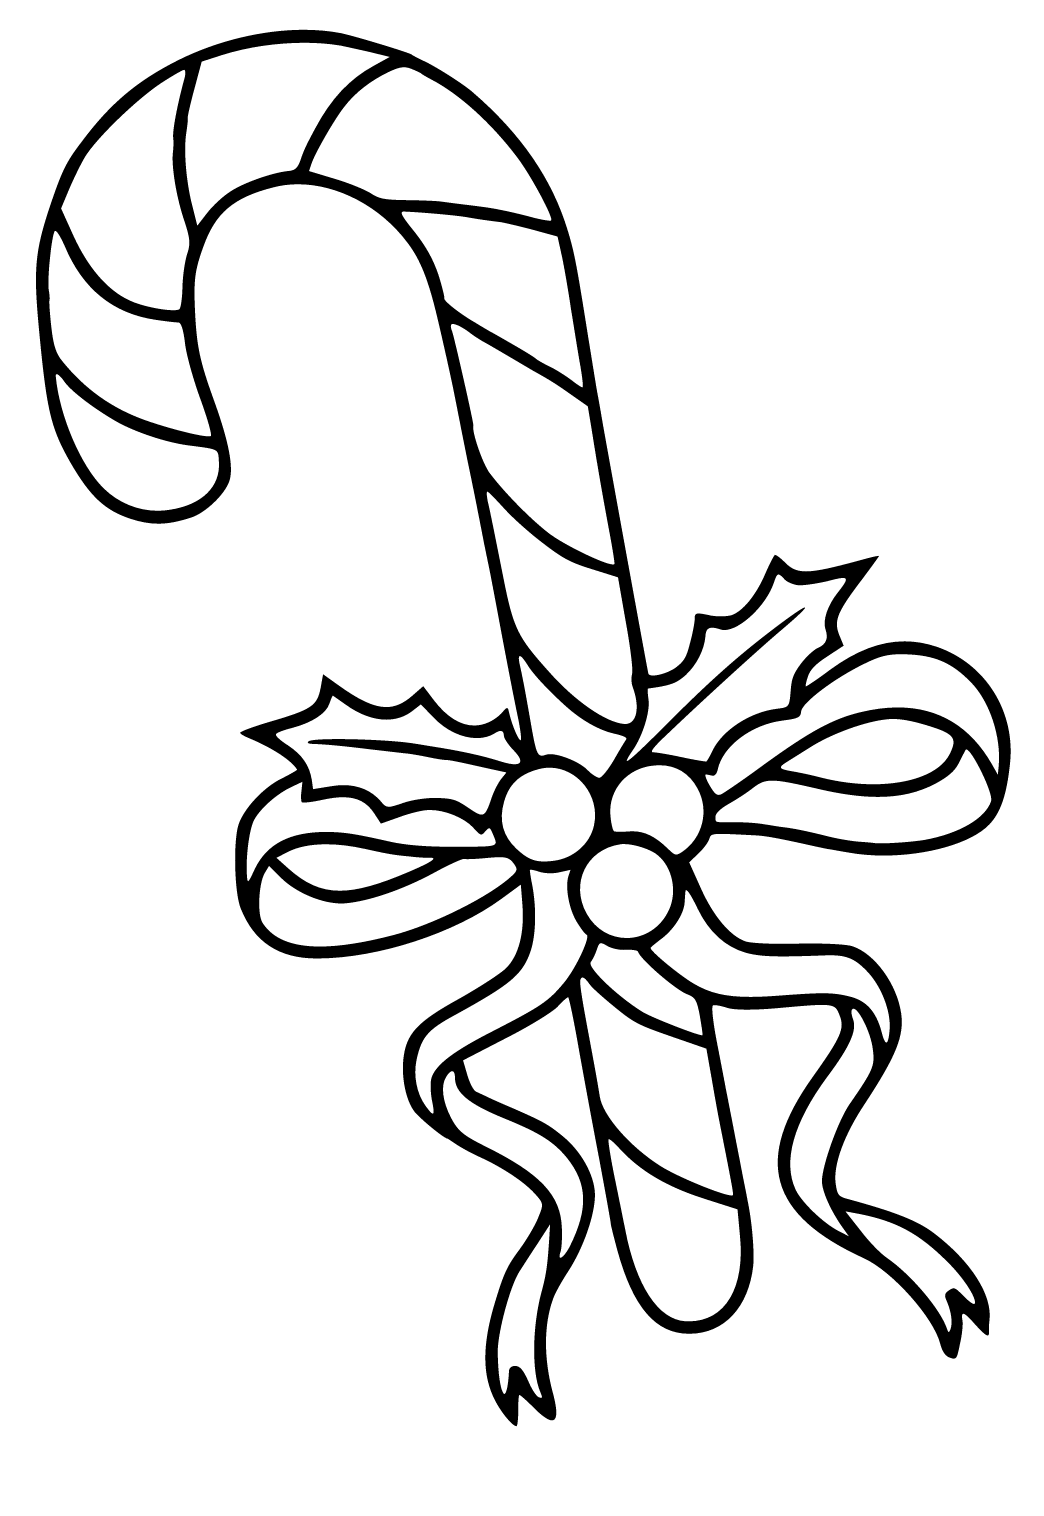 Free printable candy cane leaves coloring page for adults and kids